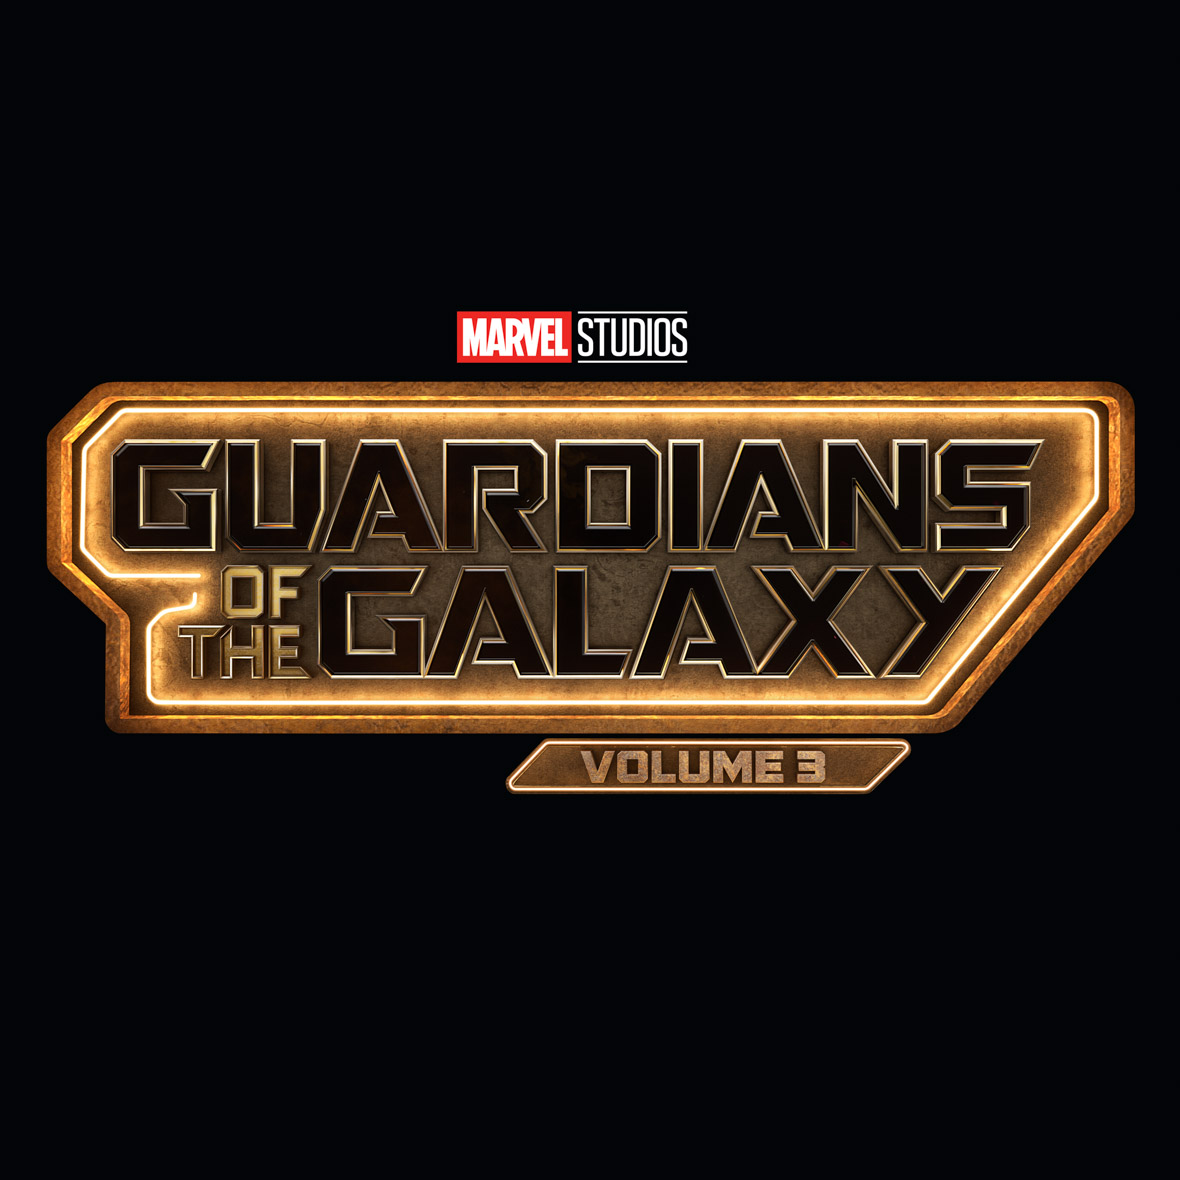 Logo image for Guardians of the Galaxy Vol.3. The title is written in black font against a golden-yellow background. The gold outline around the text is glowing and the entire logo is against a black background.